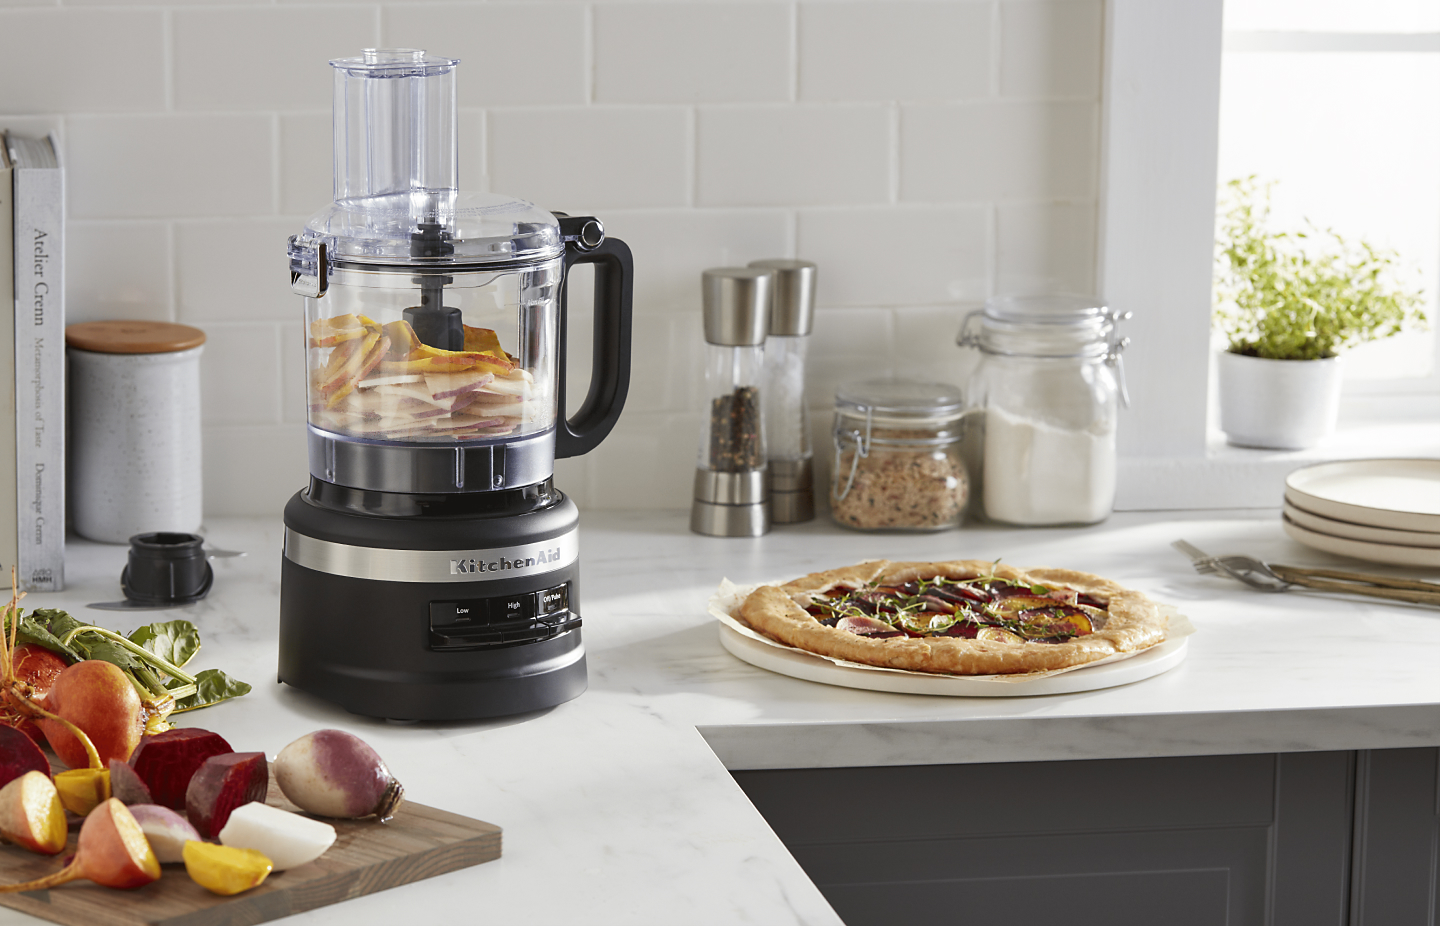 A black KitchenAid® food processor next to a pizza on the counter.